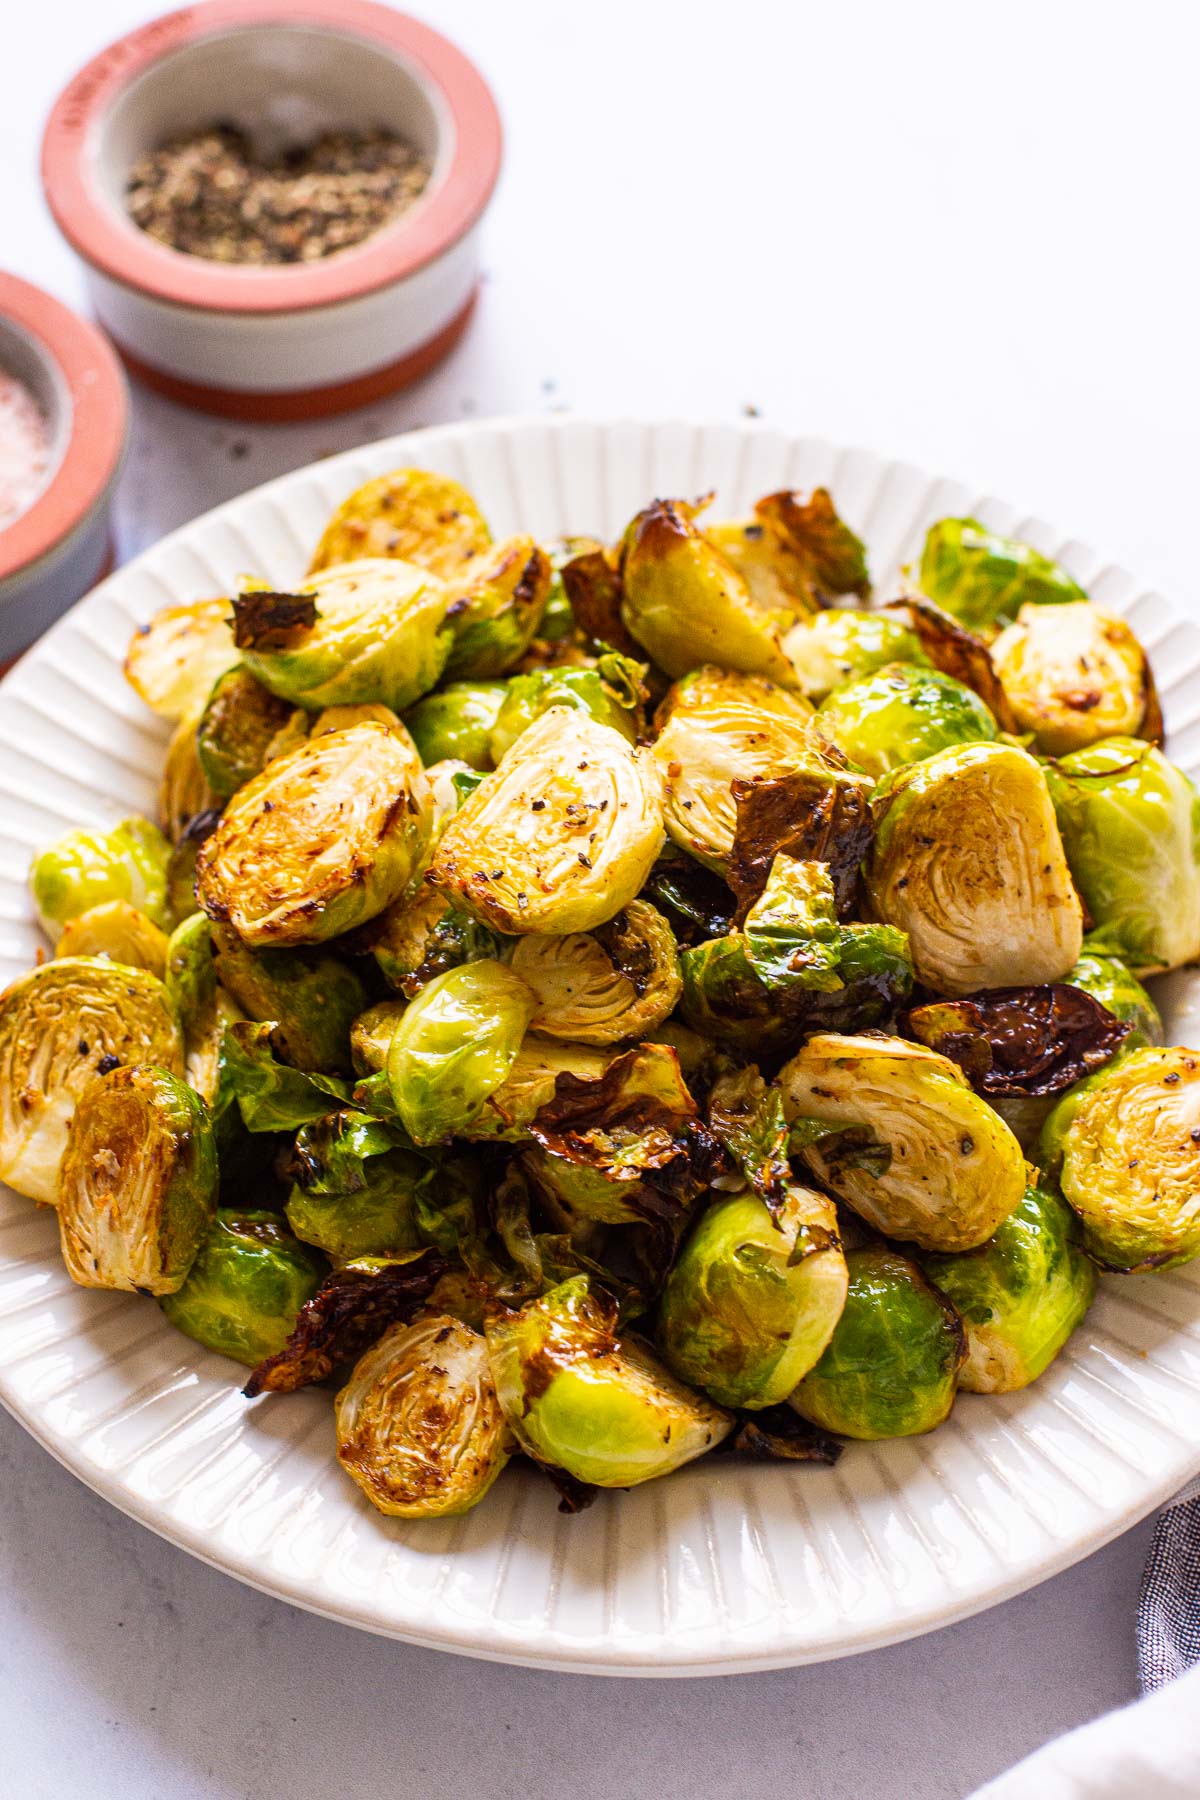 Air fryer brussels sprouts on a plate with salt and pepper in bowls nearby.